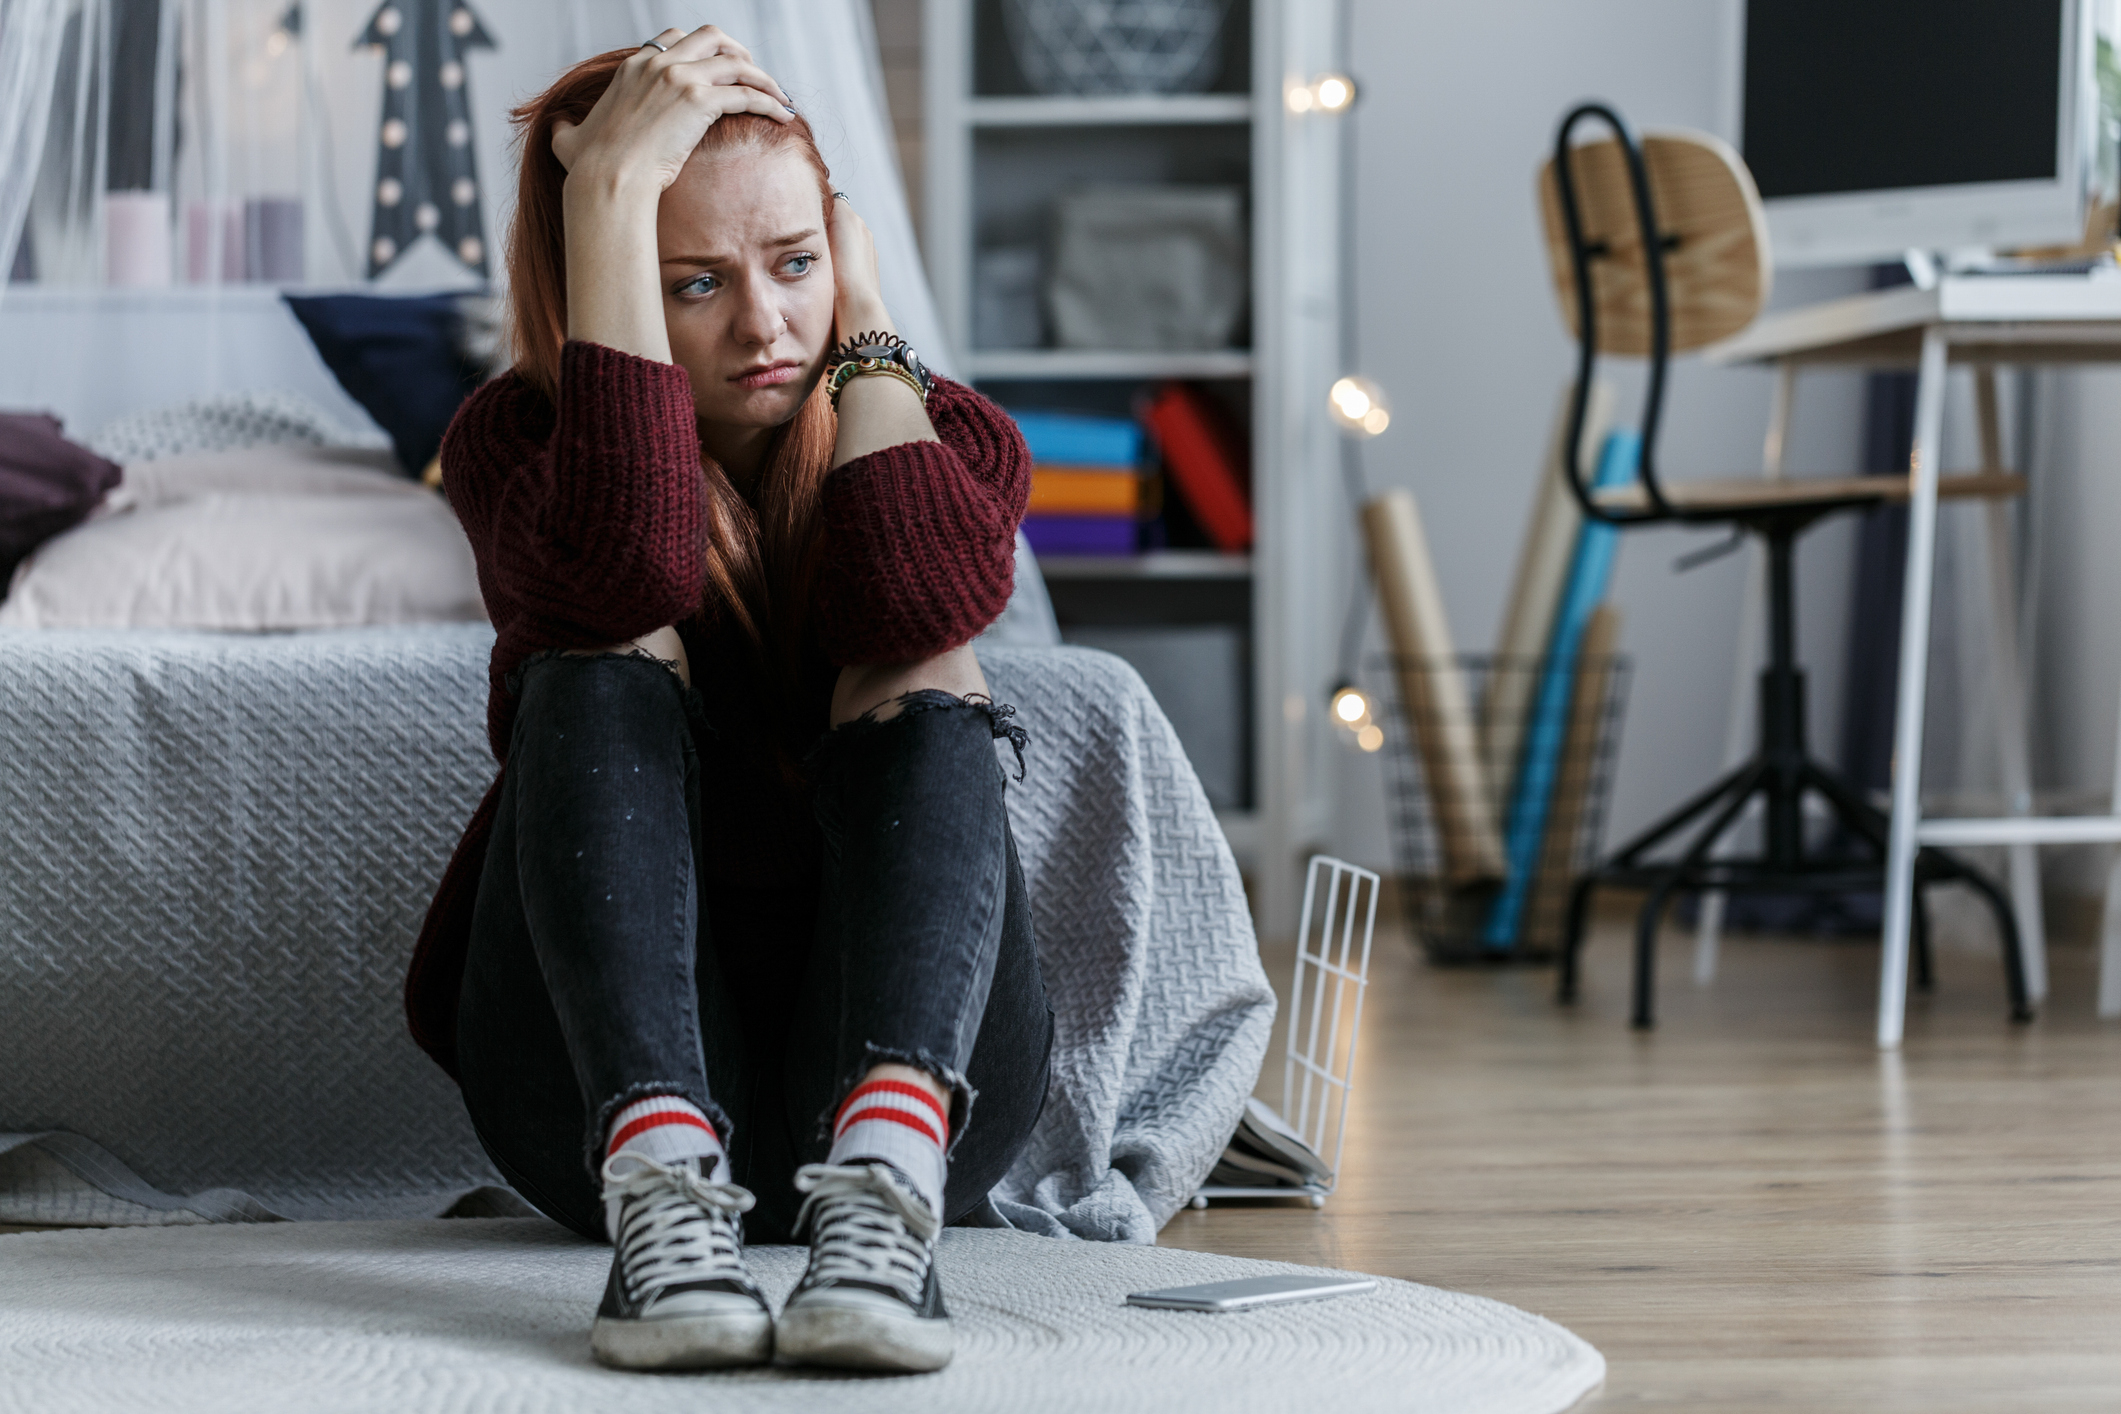 Adult in a sweater and jeans sits on the floor looking worried, with a child&#x27;s room in the background